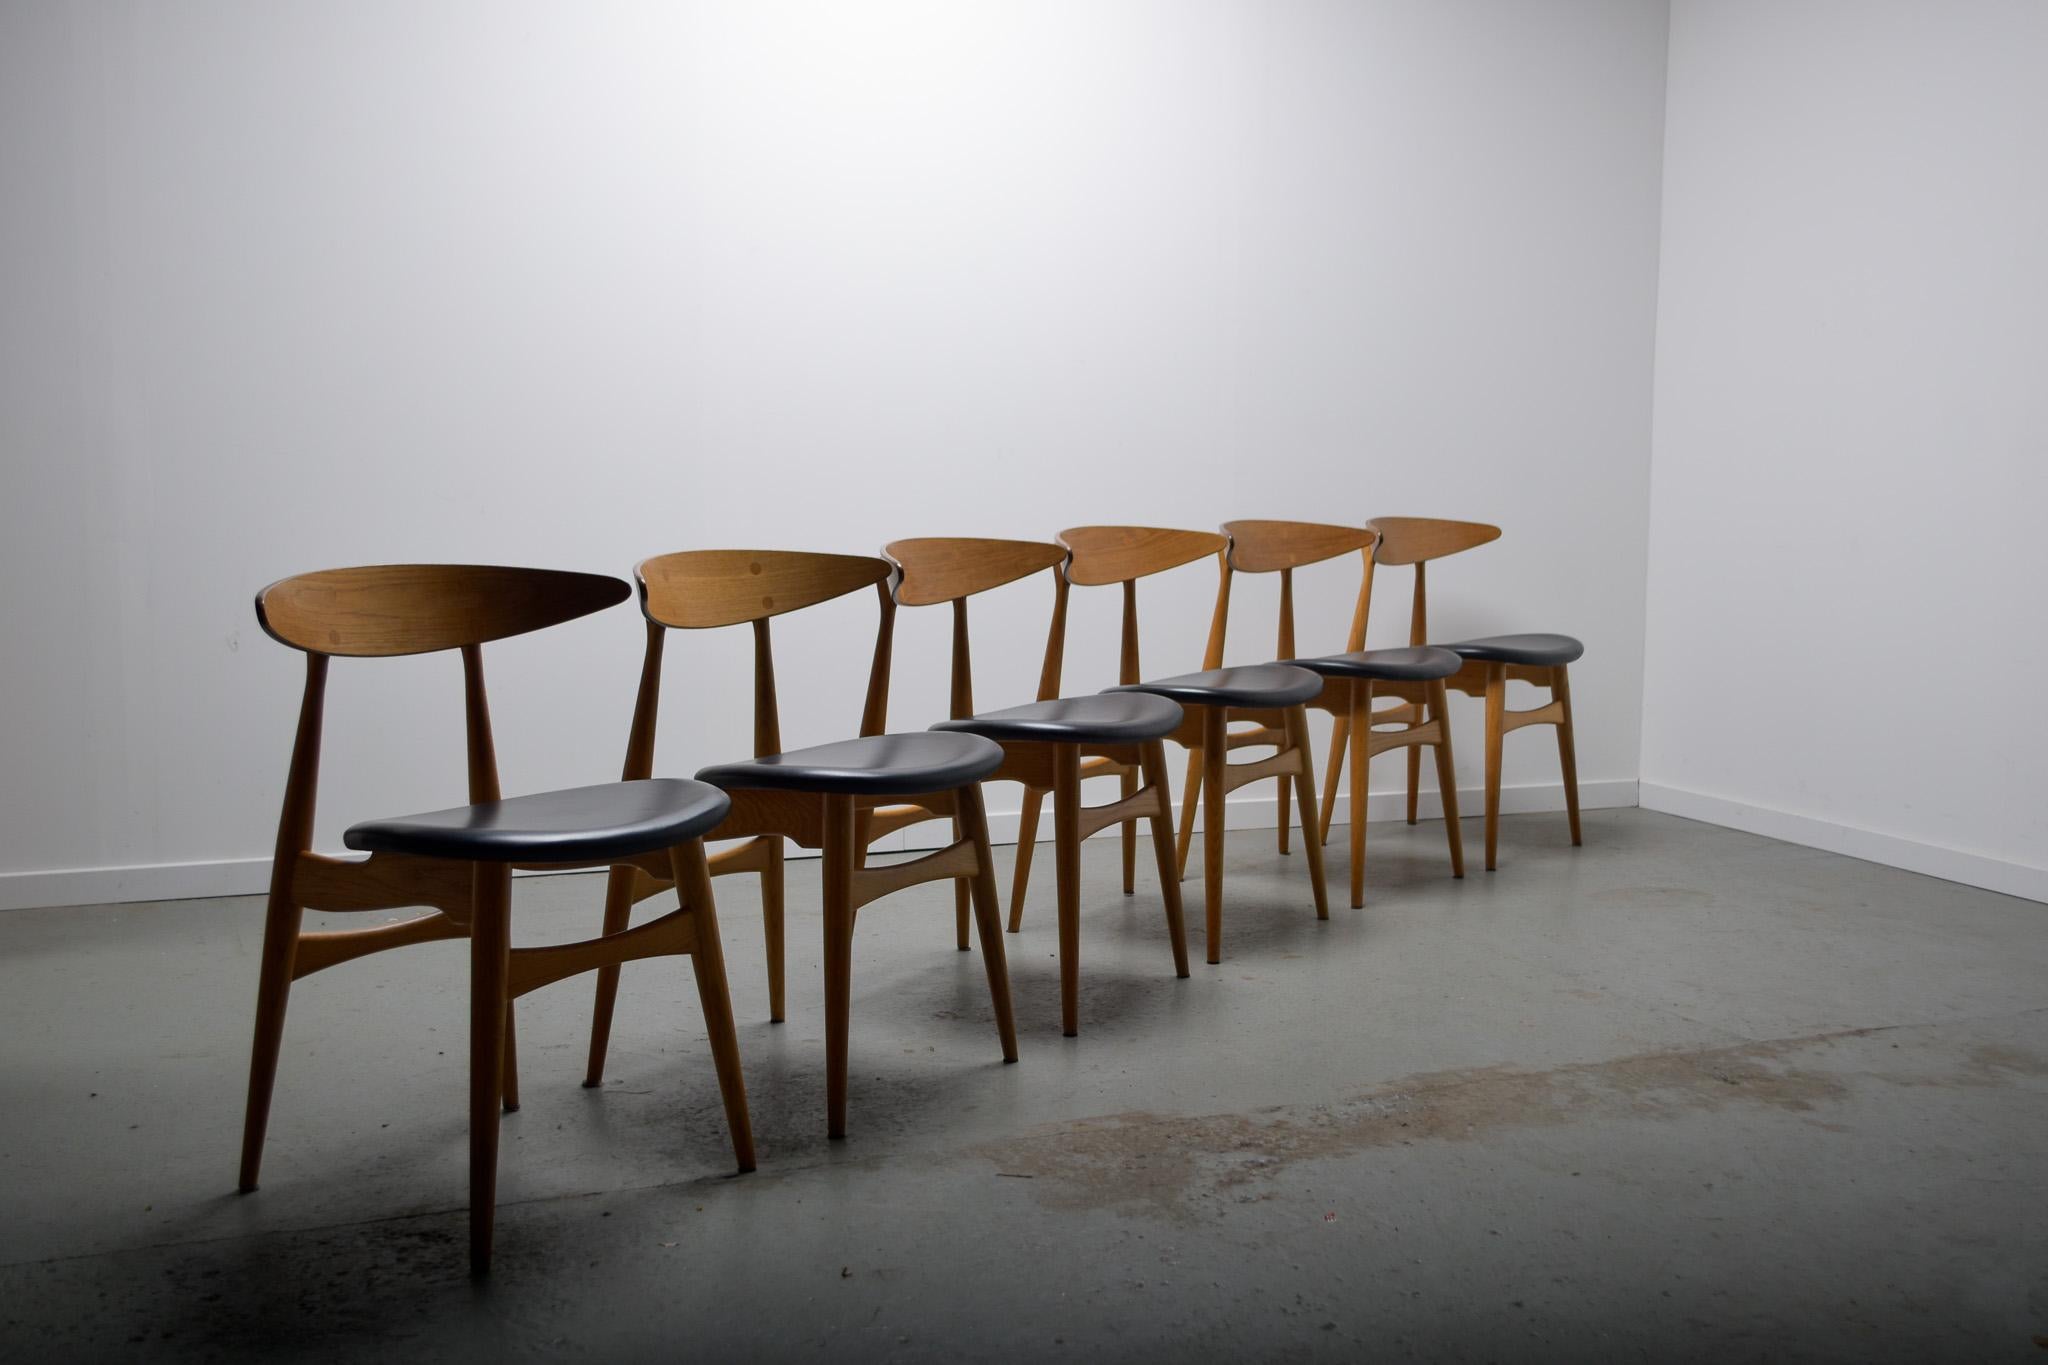 Hans J. Wegner's Iconic 1957 CH33P Chair: Timeless Ergonomics and Refined Design with Upholstered Seating. A Contemporary Relevance that Transcends Half a Century.

The chairs are made of Oak with an oiled finish. The seats are upholstered with